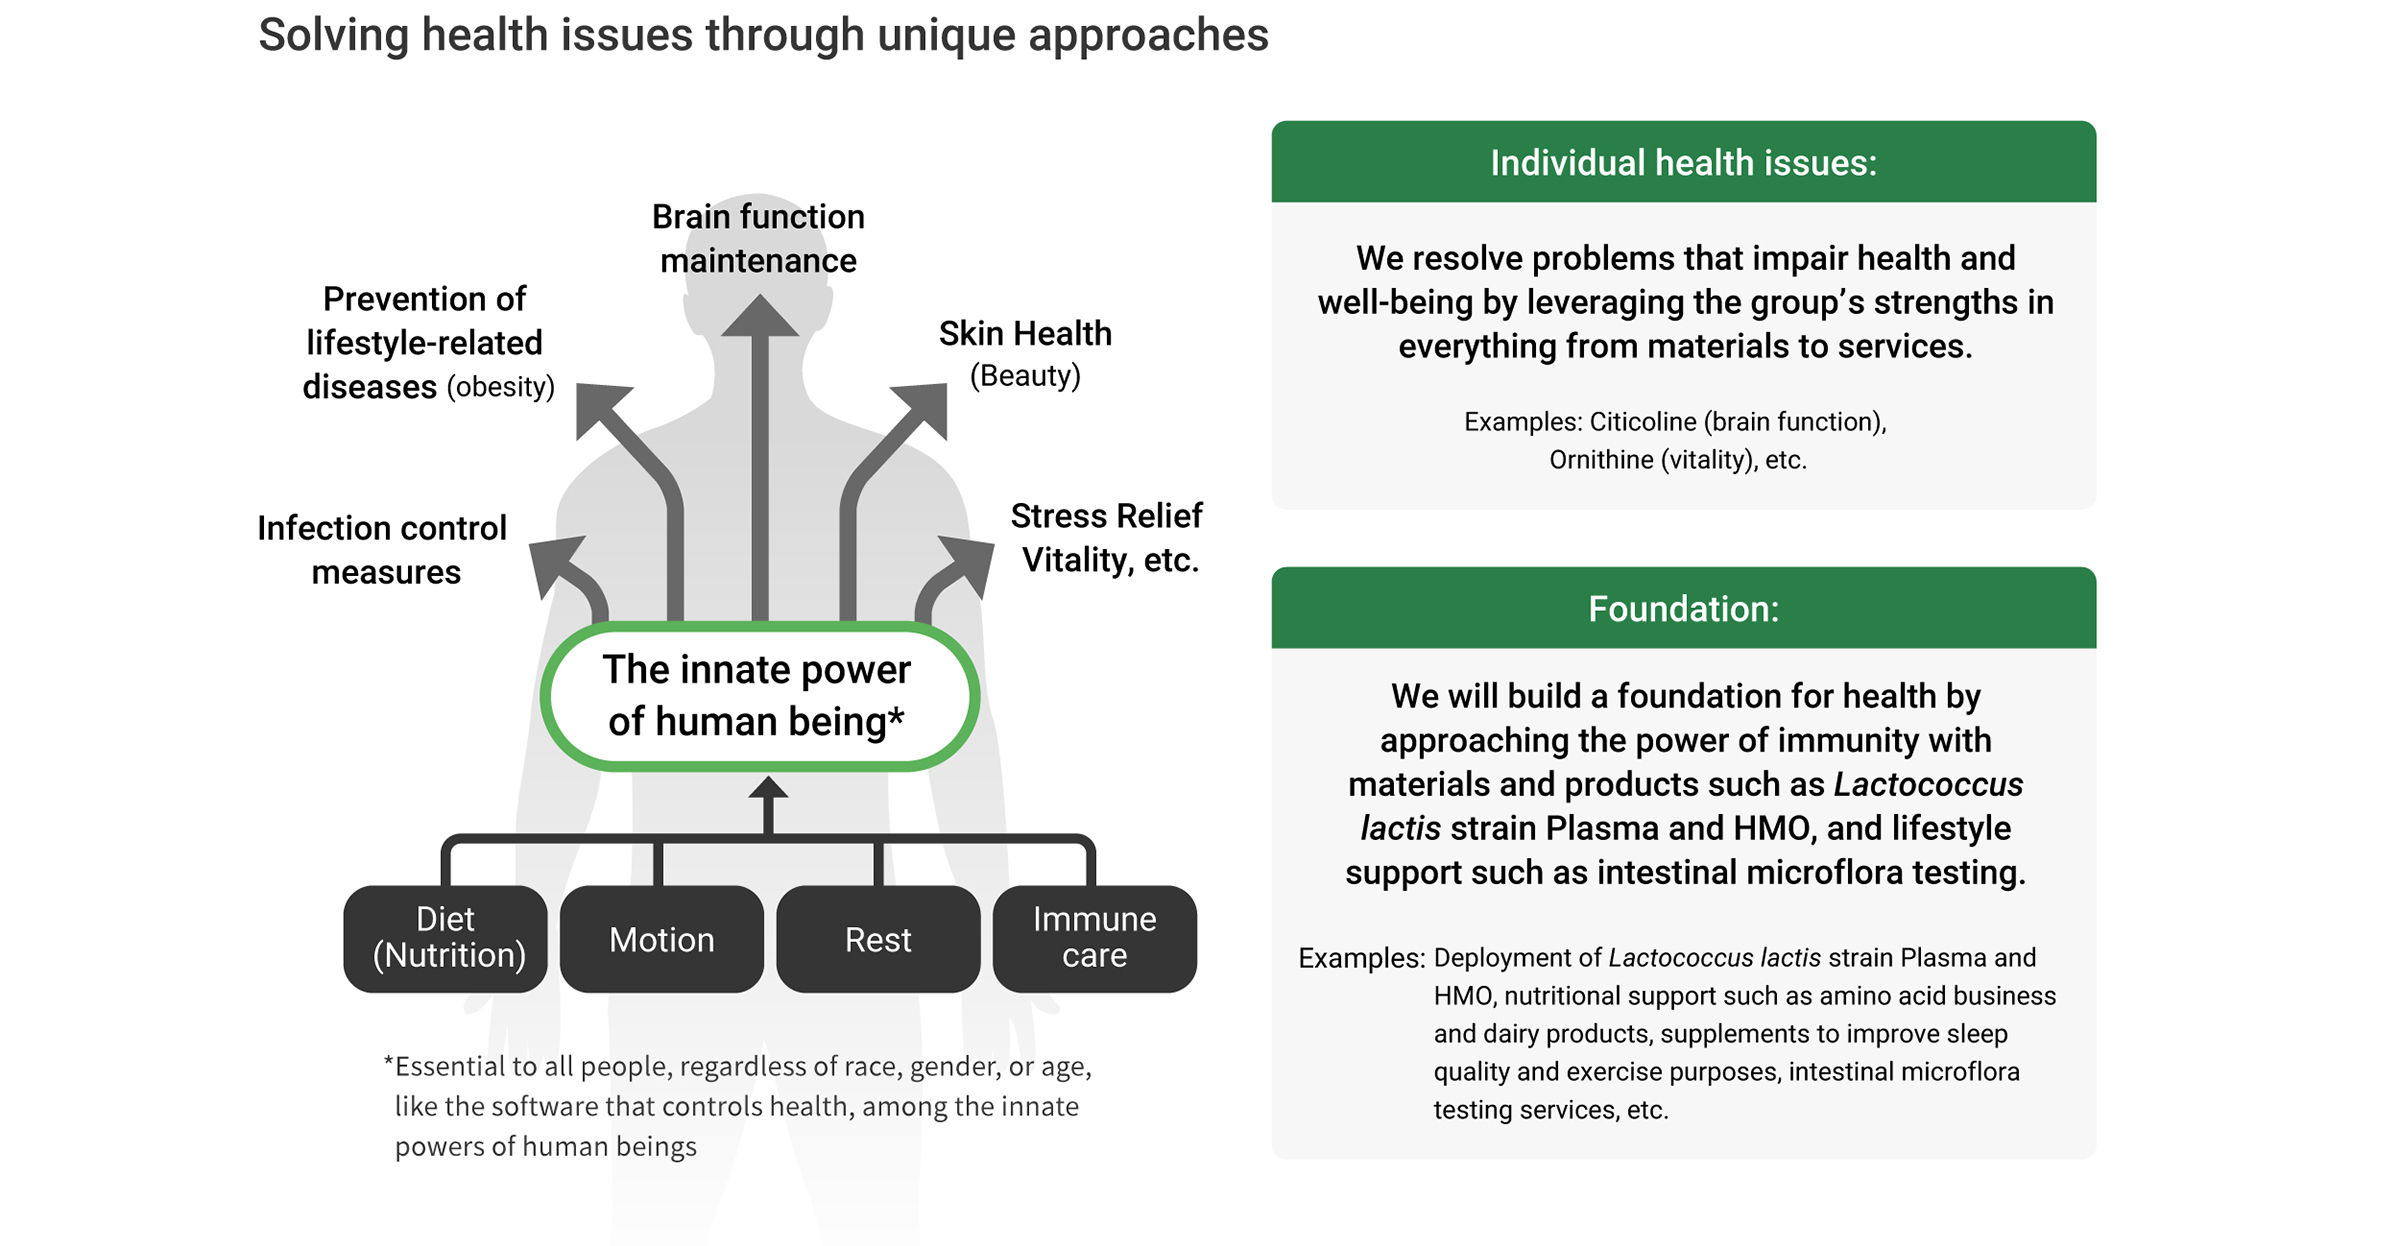 Figure: Solving health issues with a unique approach